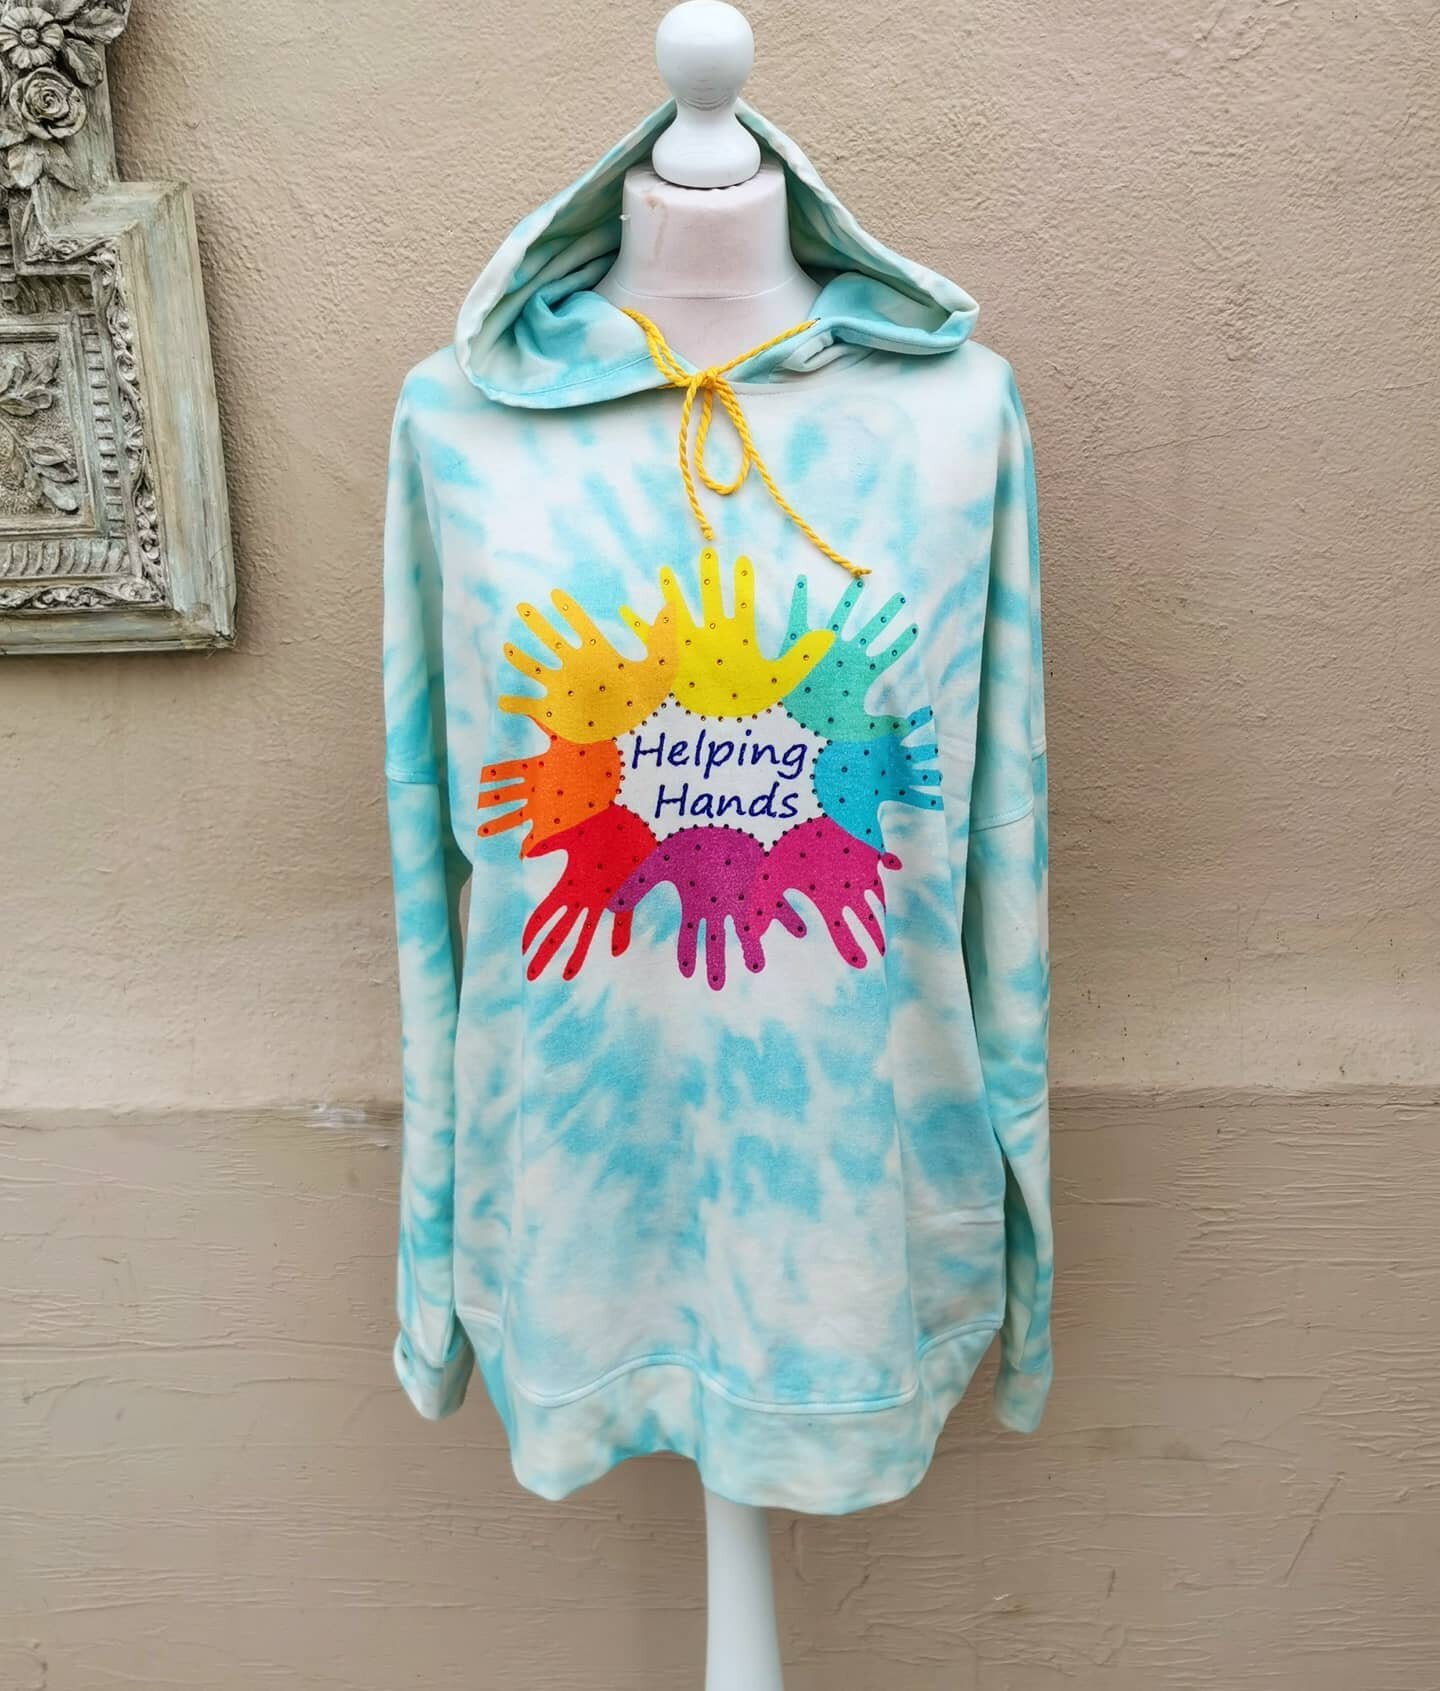 Something which is very close to my heart is my new &quot;Helping hands&quot; tie dye hoodie, which I created in recognition of all the kindness  and help I have experienced during the past year from friends, family, neighbours and complete strangers